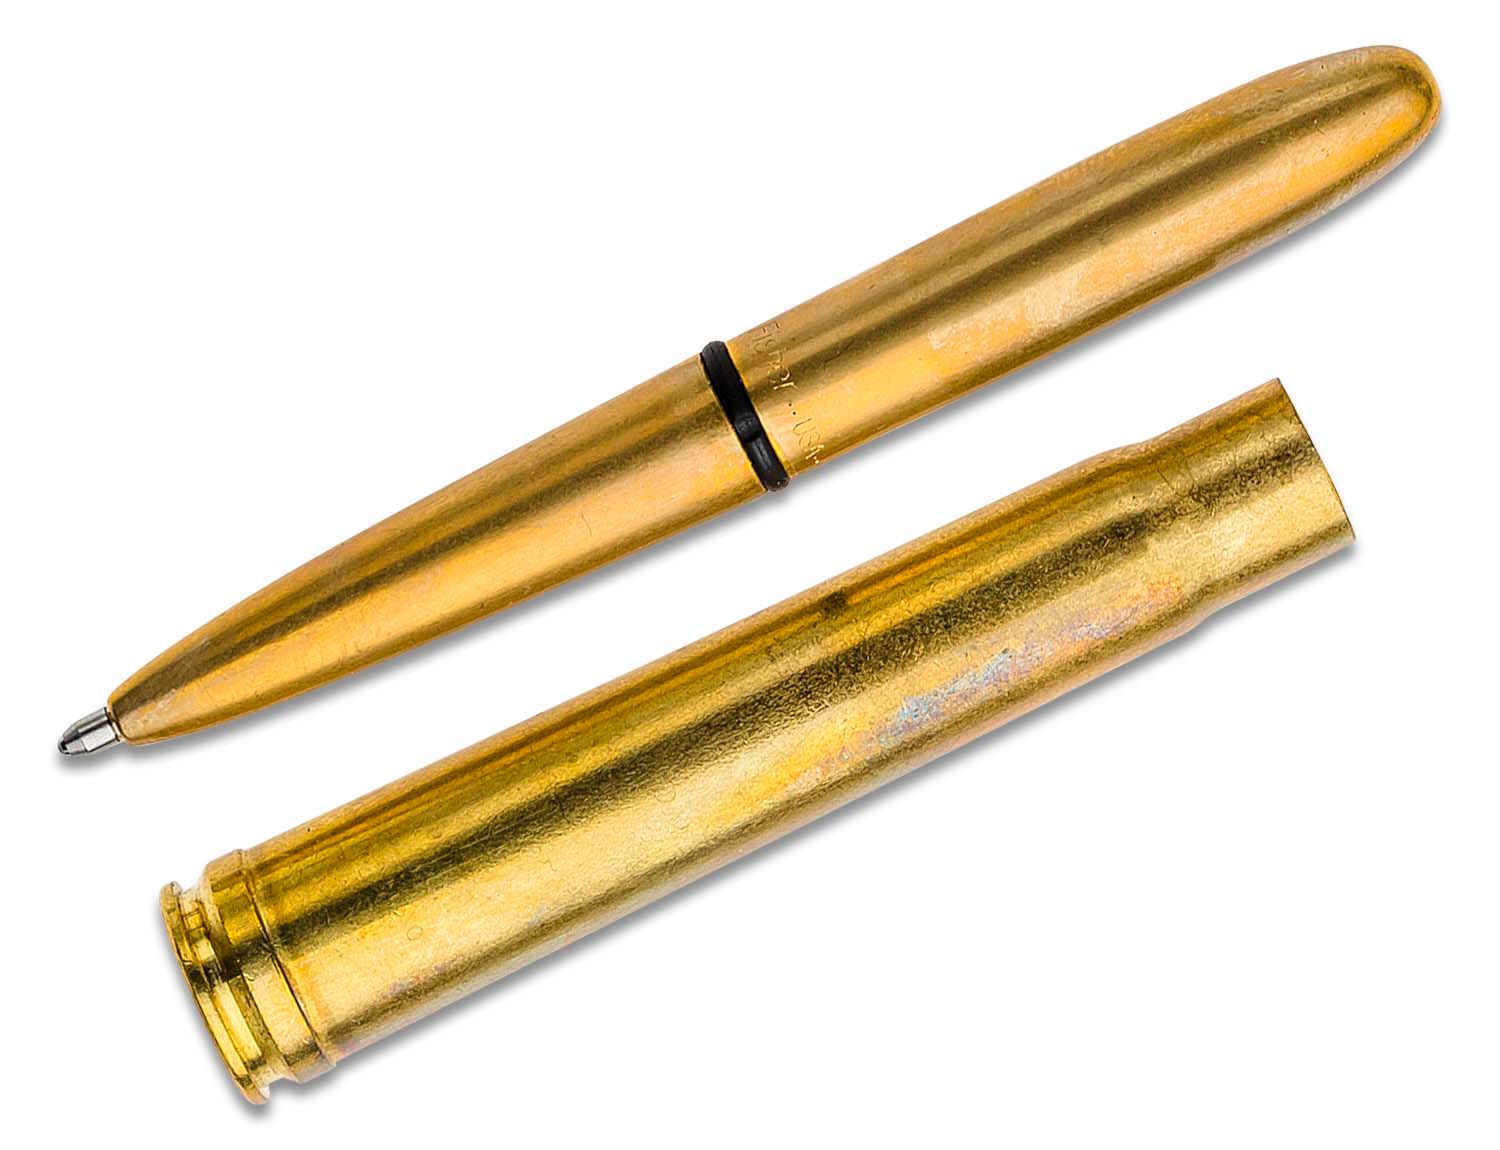 2 Fisher Space Pens #.375 H&H MAG Bullet Pens in Brass Casings TWO 